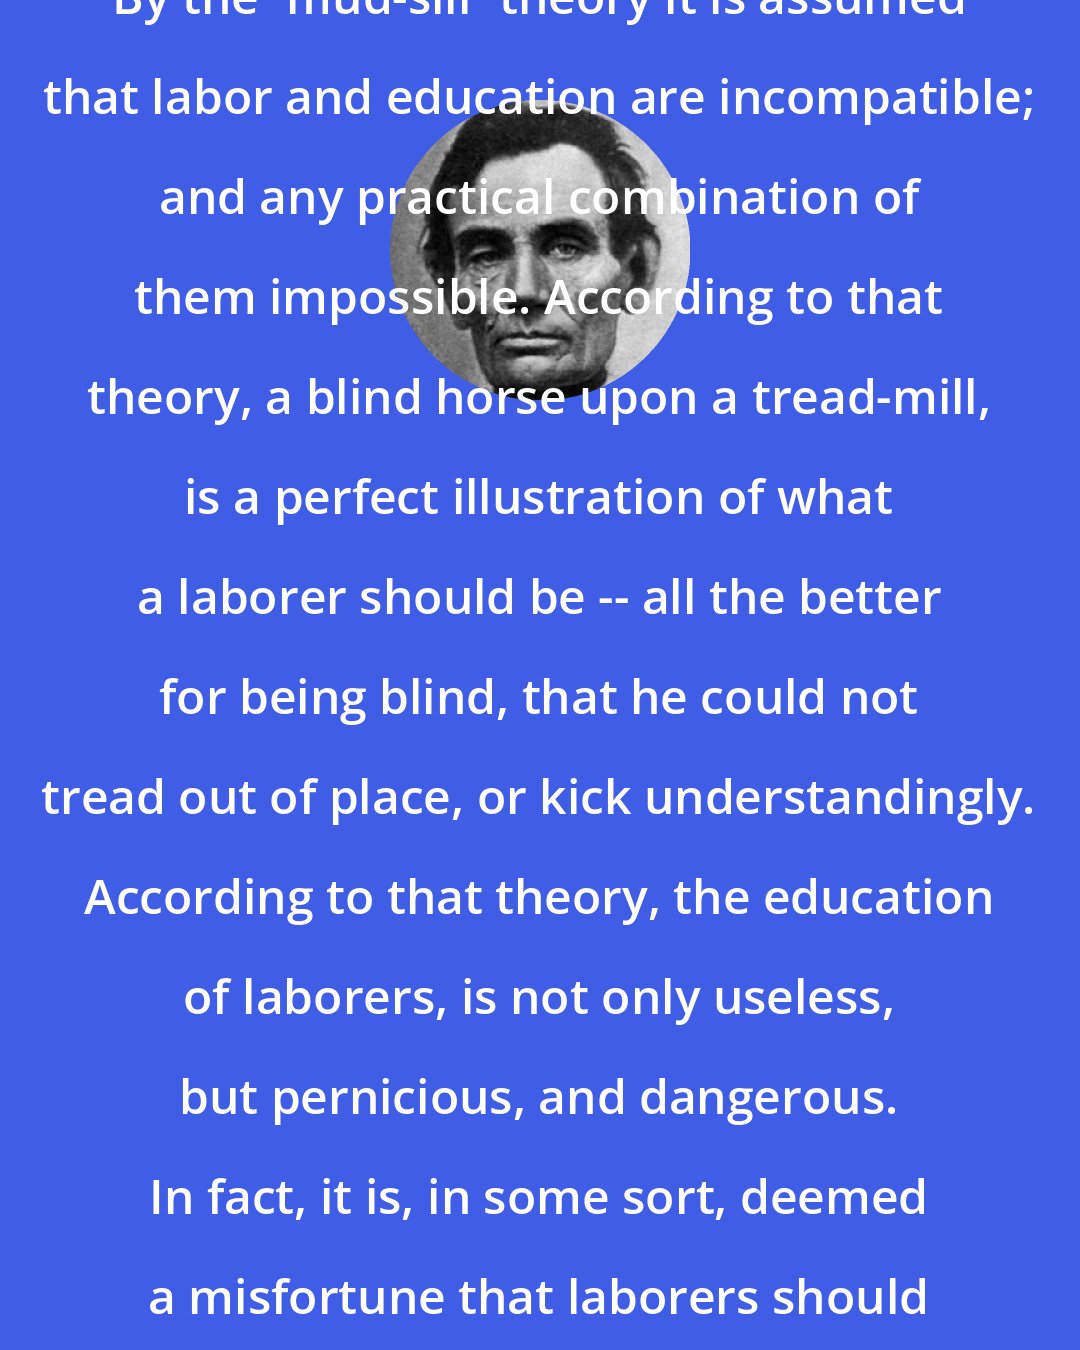 Abraham Lincoln: By the 'mud-sill' theory it is assumed that labor and education are incompatible; and any practical combination of them impossible. According to that theory, a blind horse upon a tread-mill, is a perfect illustration of what a laborer should be -- all the better for being blind, that he could not tread out of place, or kick understandingly. According to that theory, the education of laborers, is not only useless, but pernicious, and dangerous. In fact, it is, in some sort, deemed a misfortune that laborers should have heads at all.